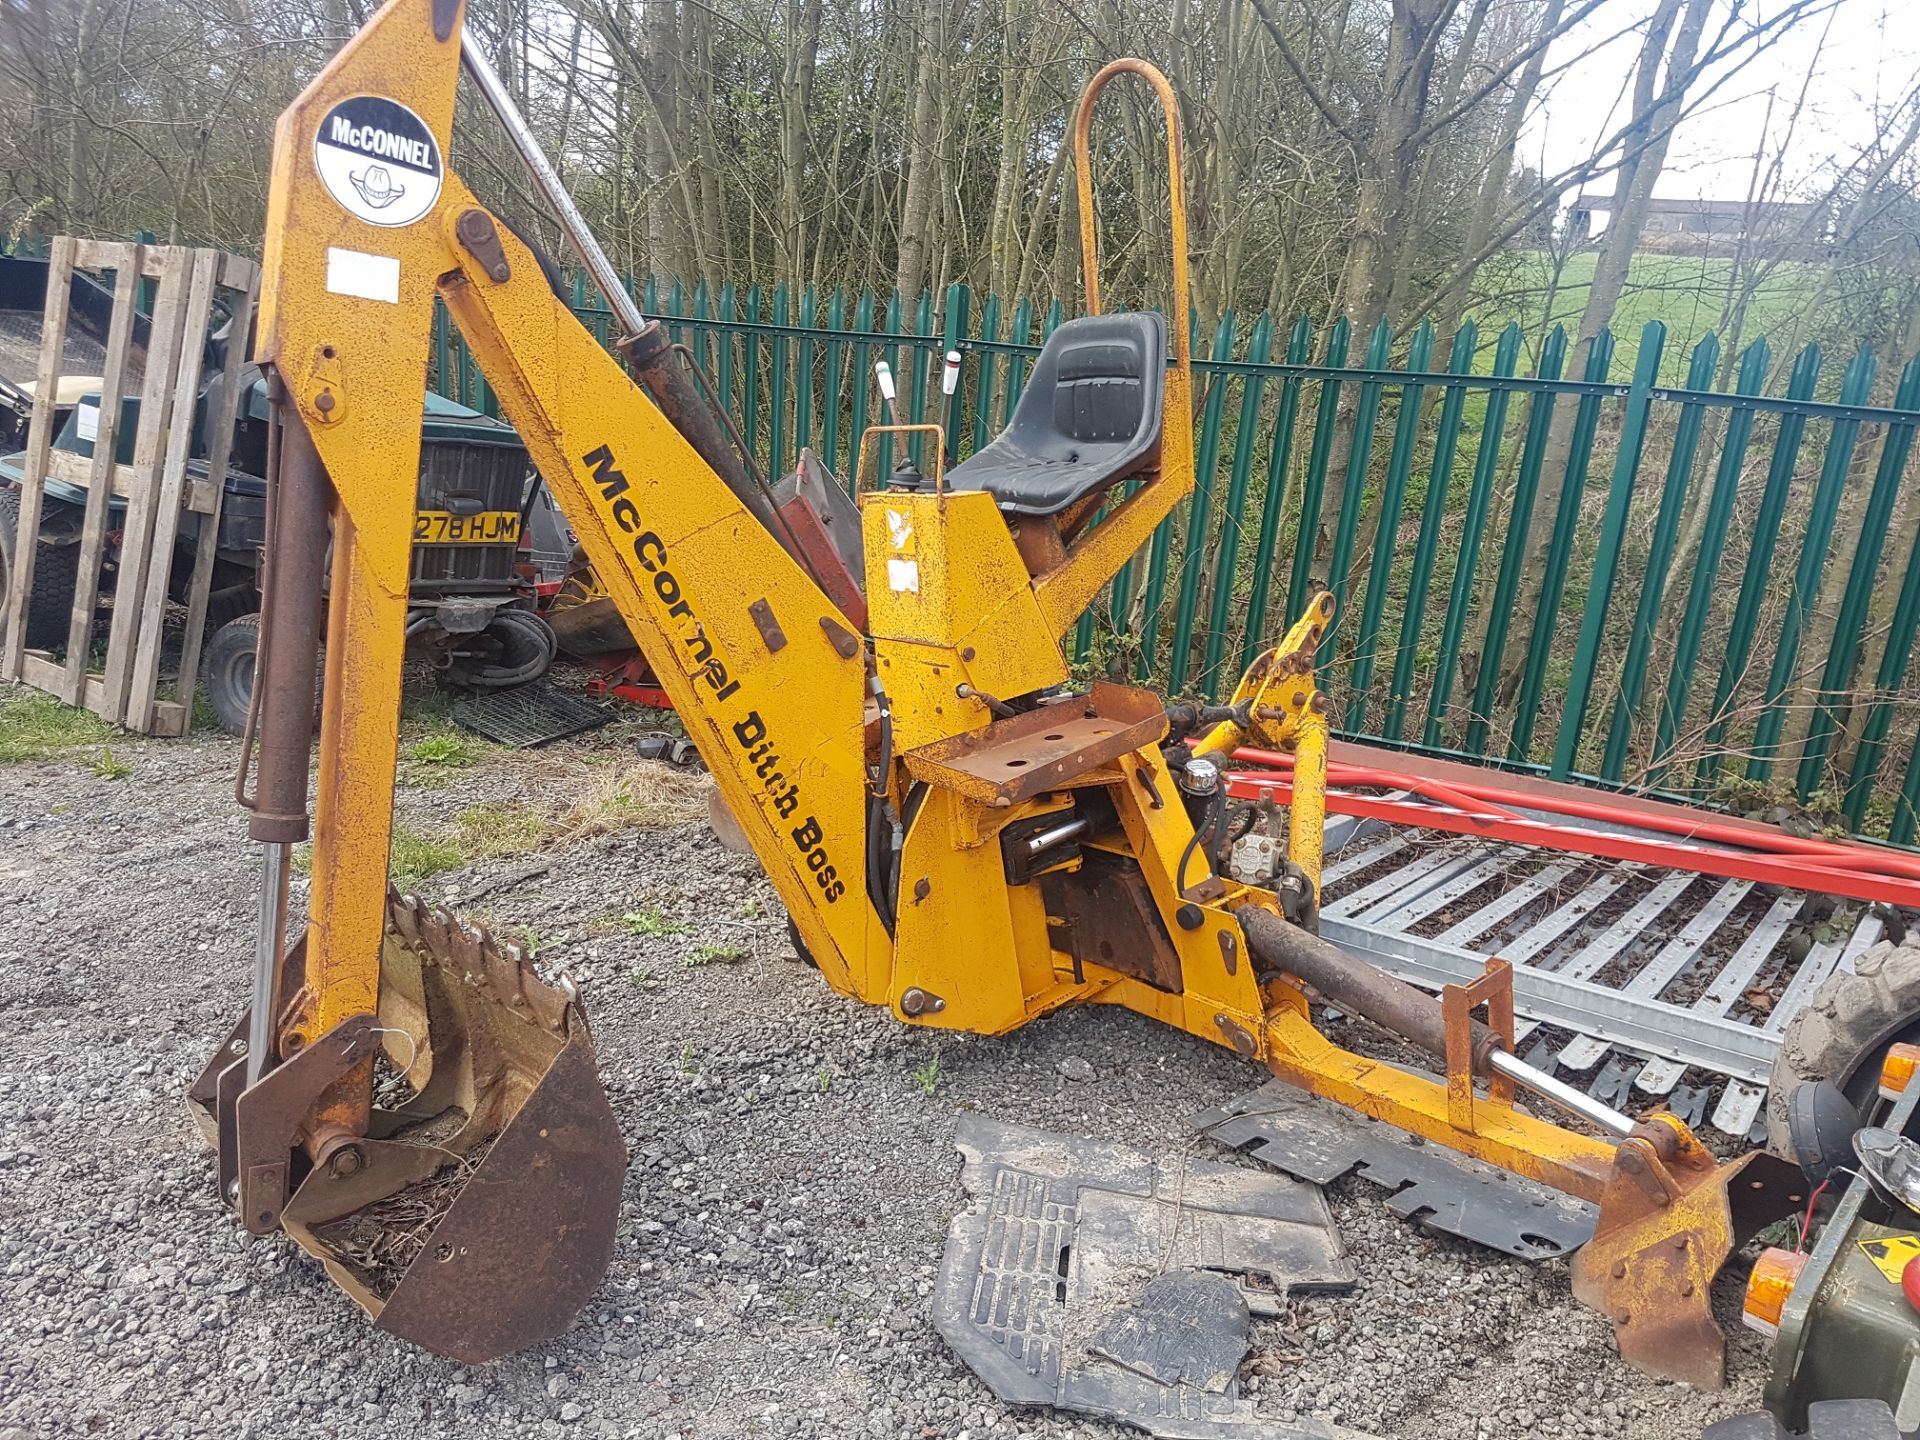 DS - McCONNEL DITCH BOSS REAR TRACTOR ATTACHMENT *PLUS VAT*   COLLECTION / VIEWING FROM PILSLEY, - Image 2 of 6